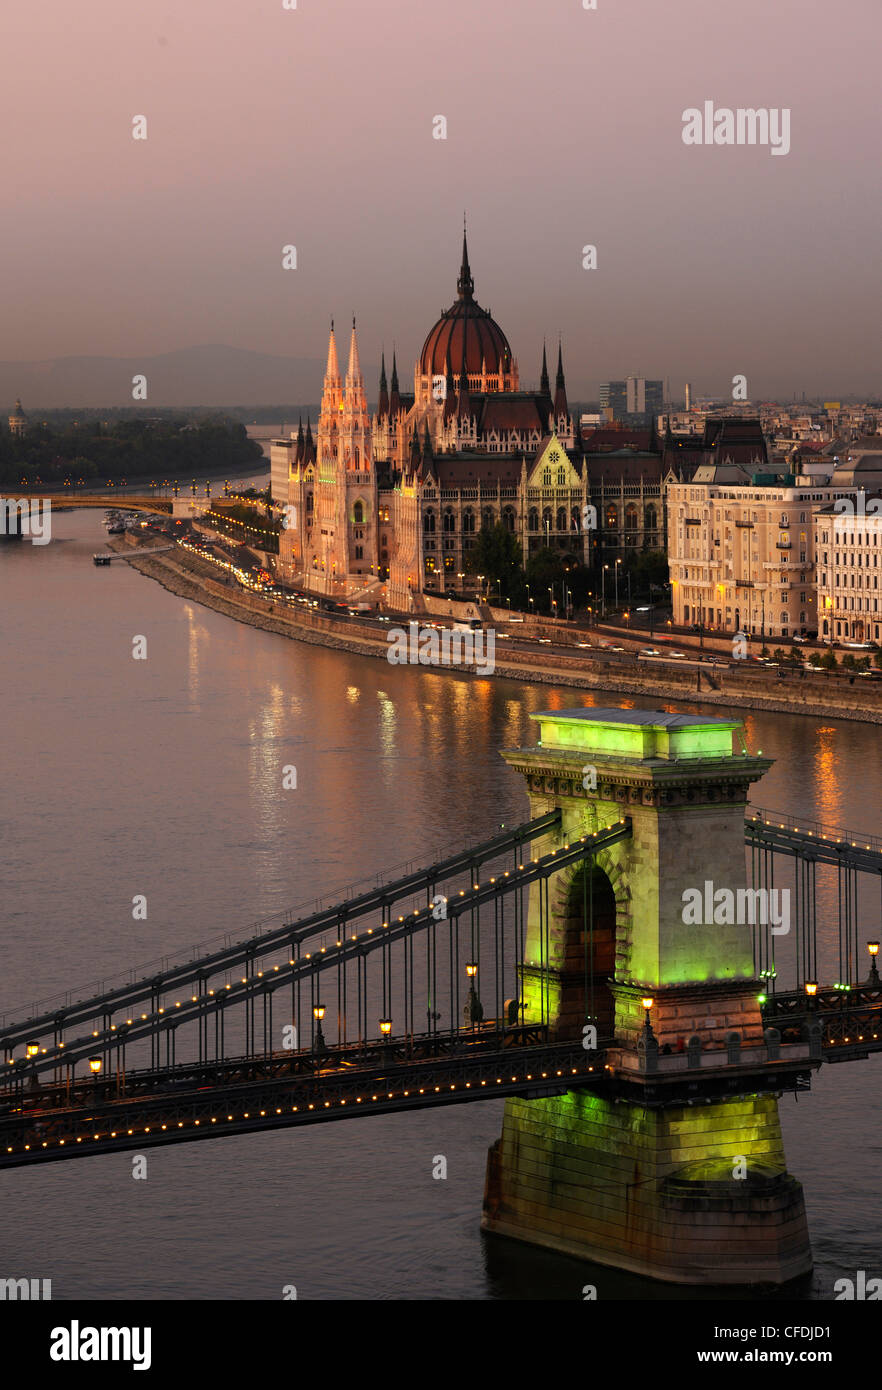 View of Danube river, Chain Bridge and House of Parliament in the evening, Budapest, Hungary, Europe Stock Photo